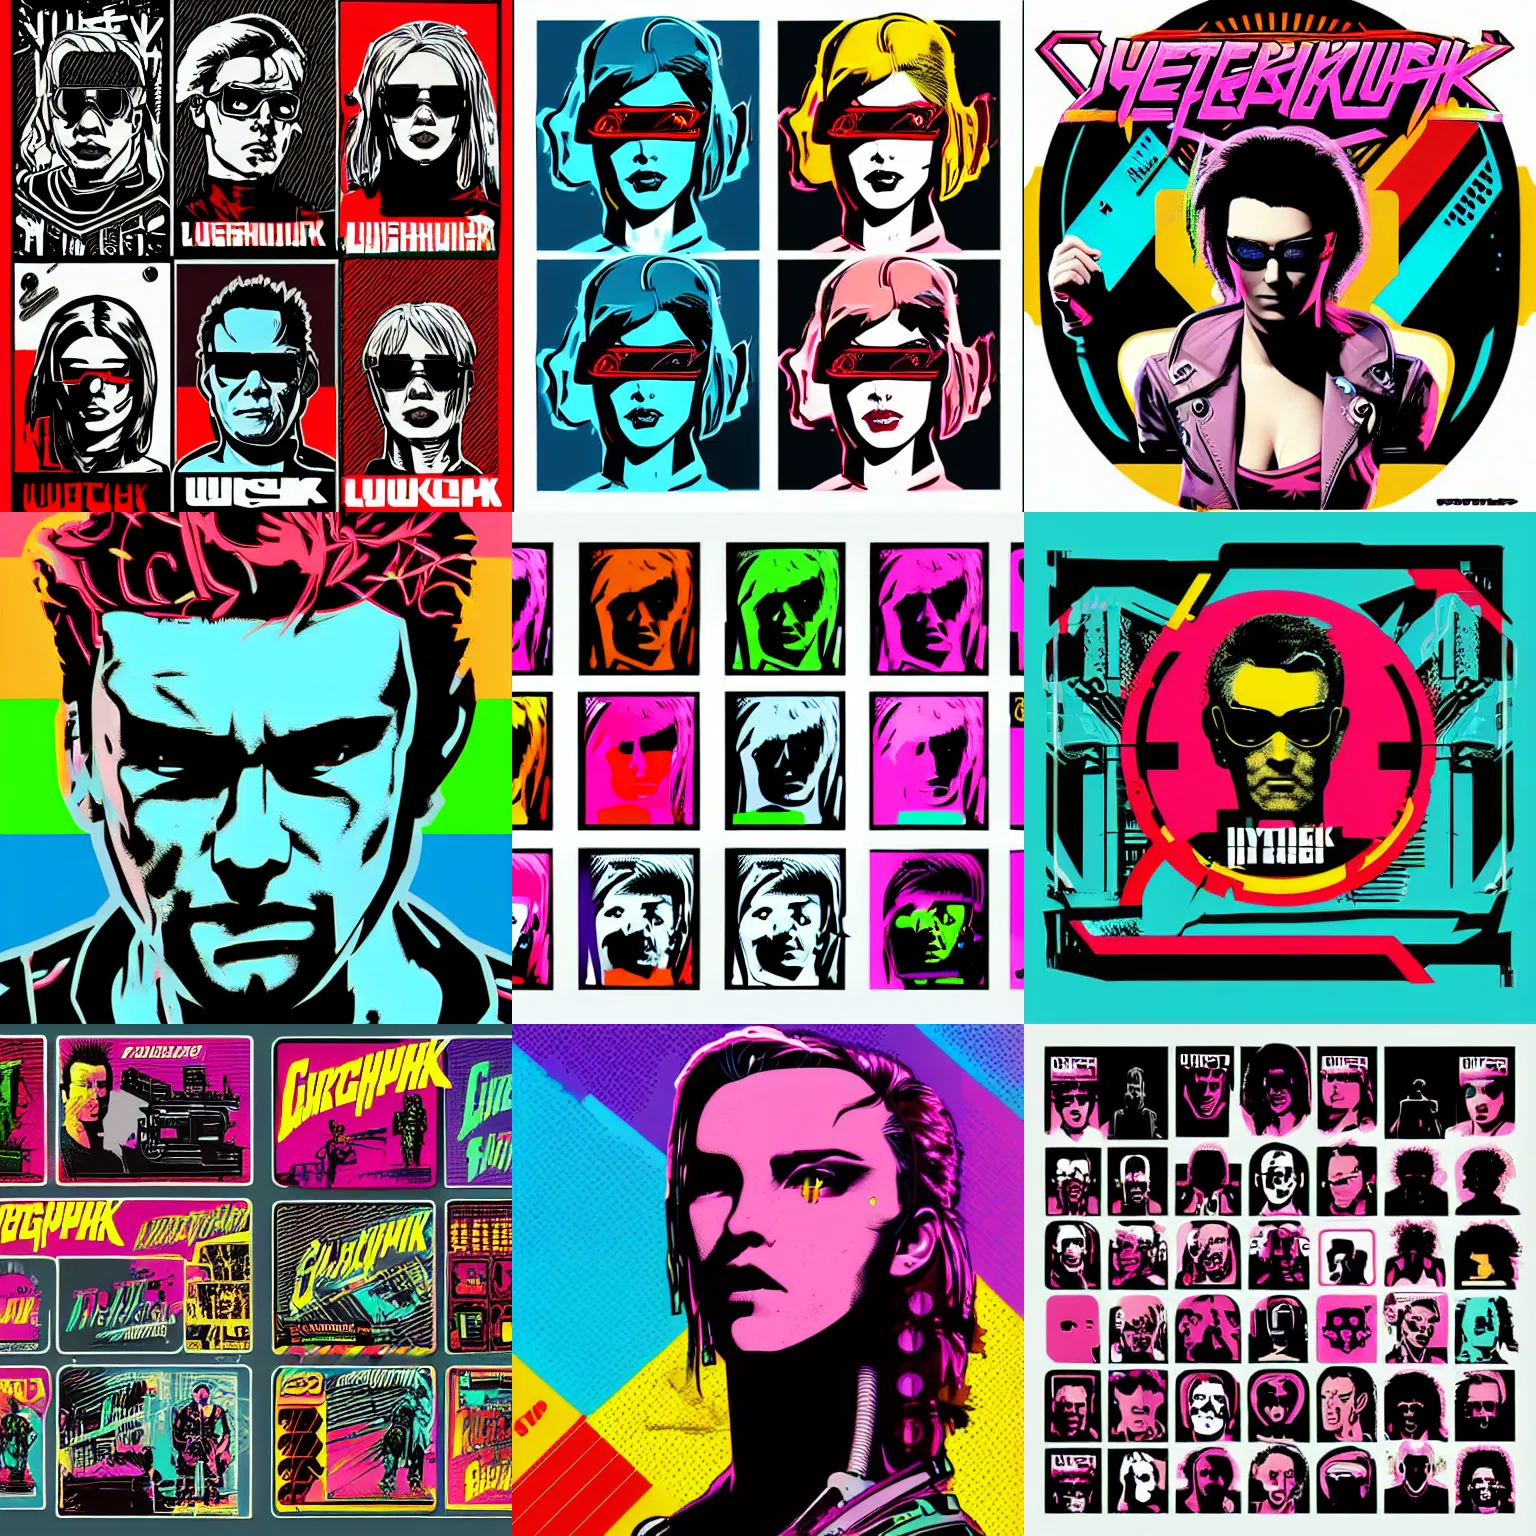 Prompt: cyberpunk 2 0 7 7 by butcher billy, sticker, vector art, andy warhol style